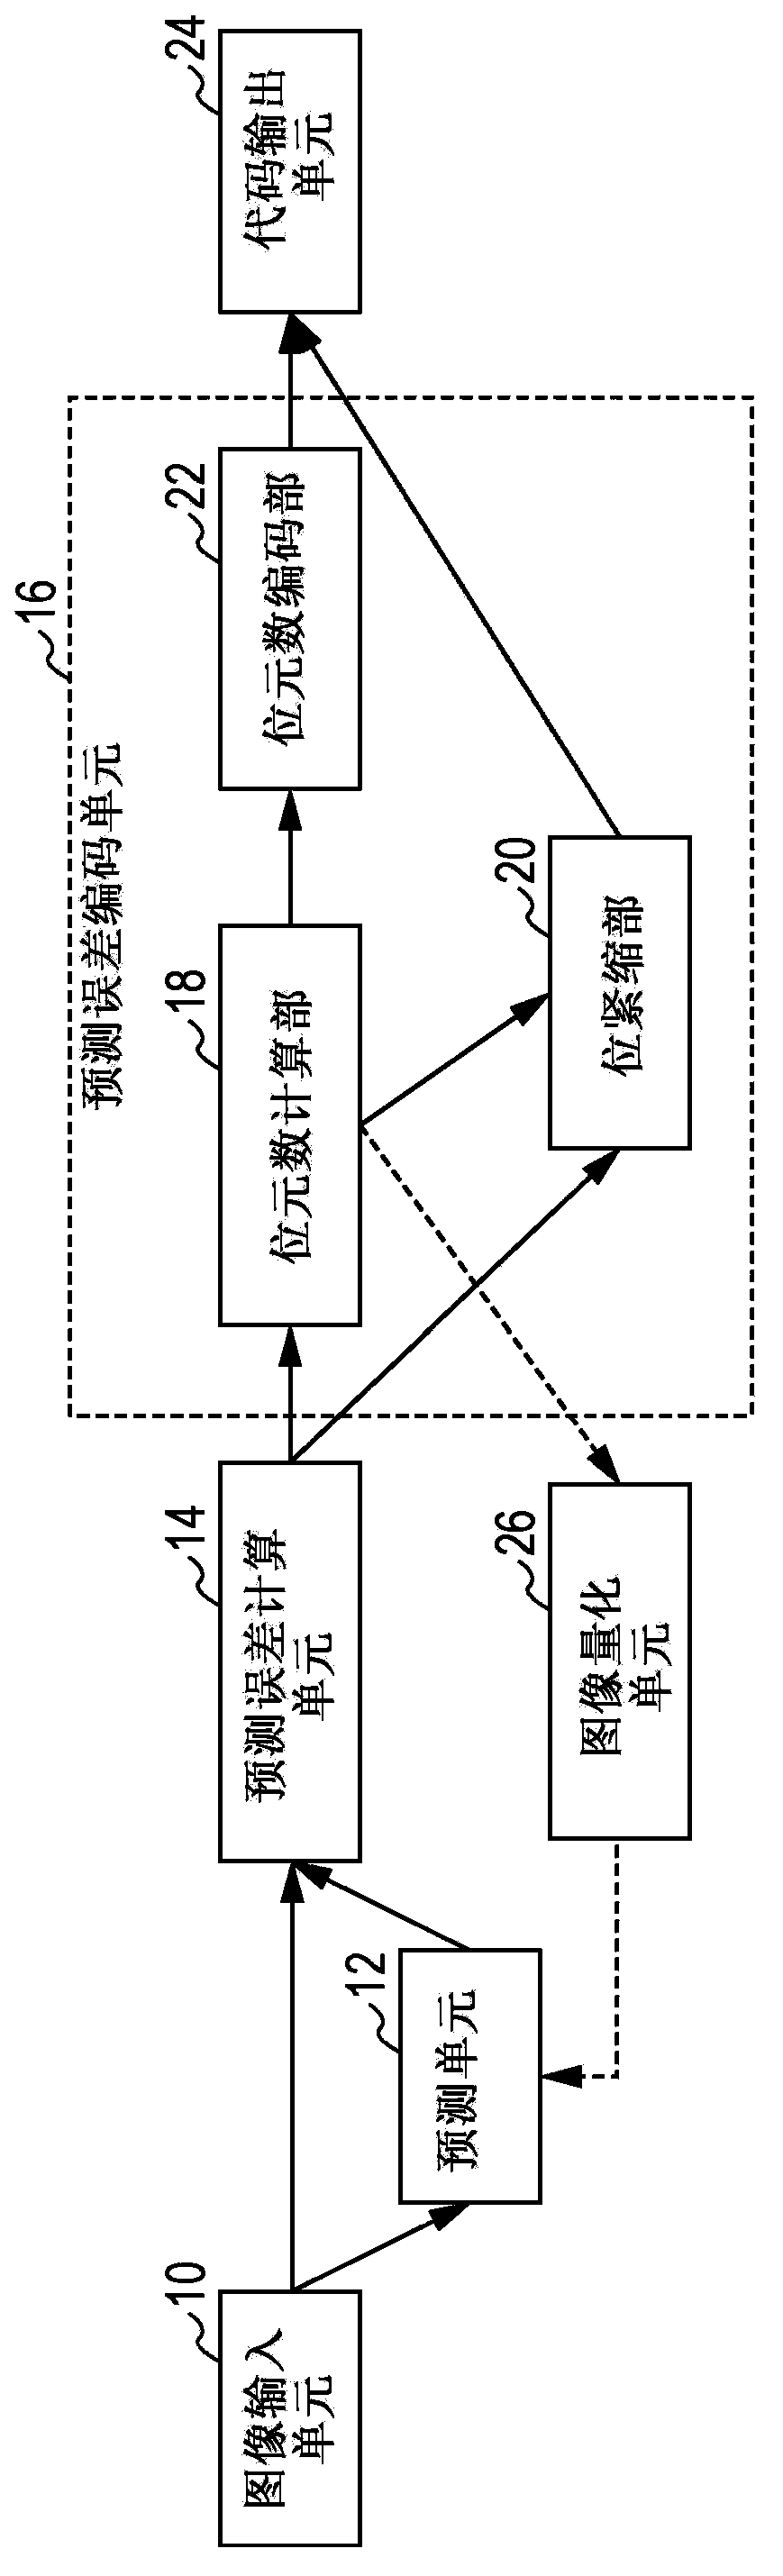 Image encoding apparatus and method, and image decoding apparatus and method